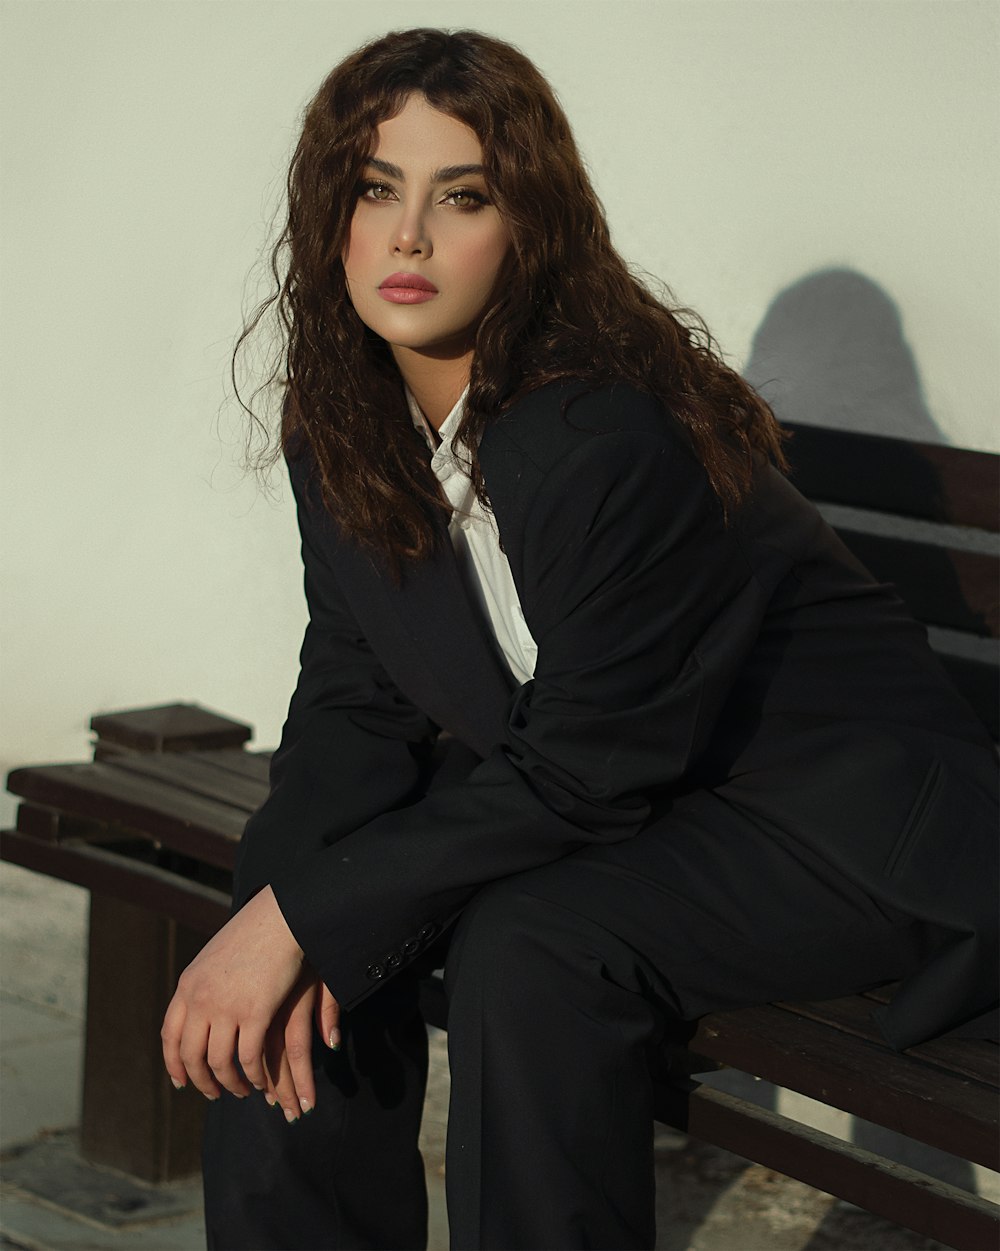 a woman in a suit sitting on a bench